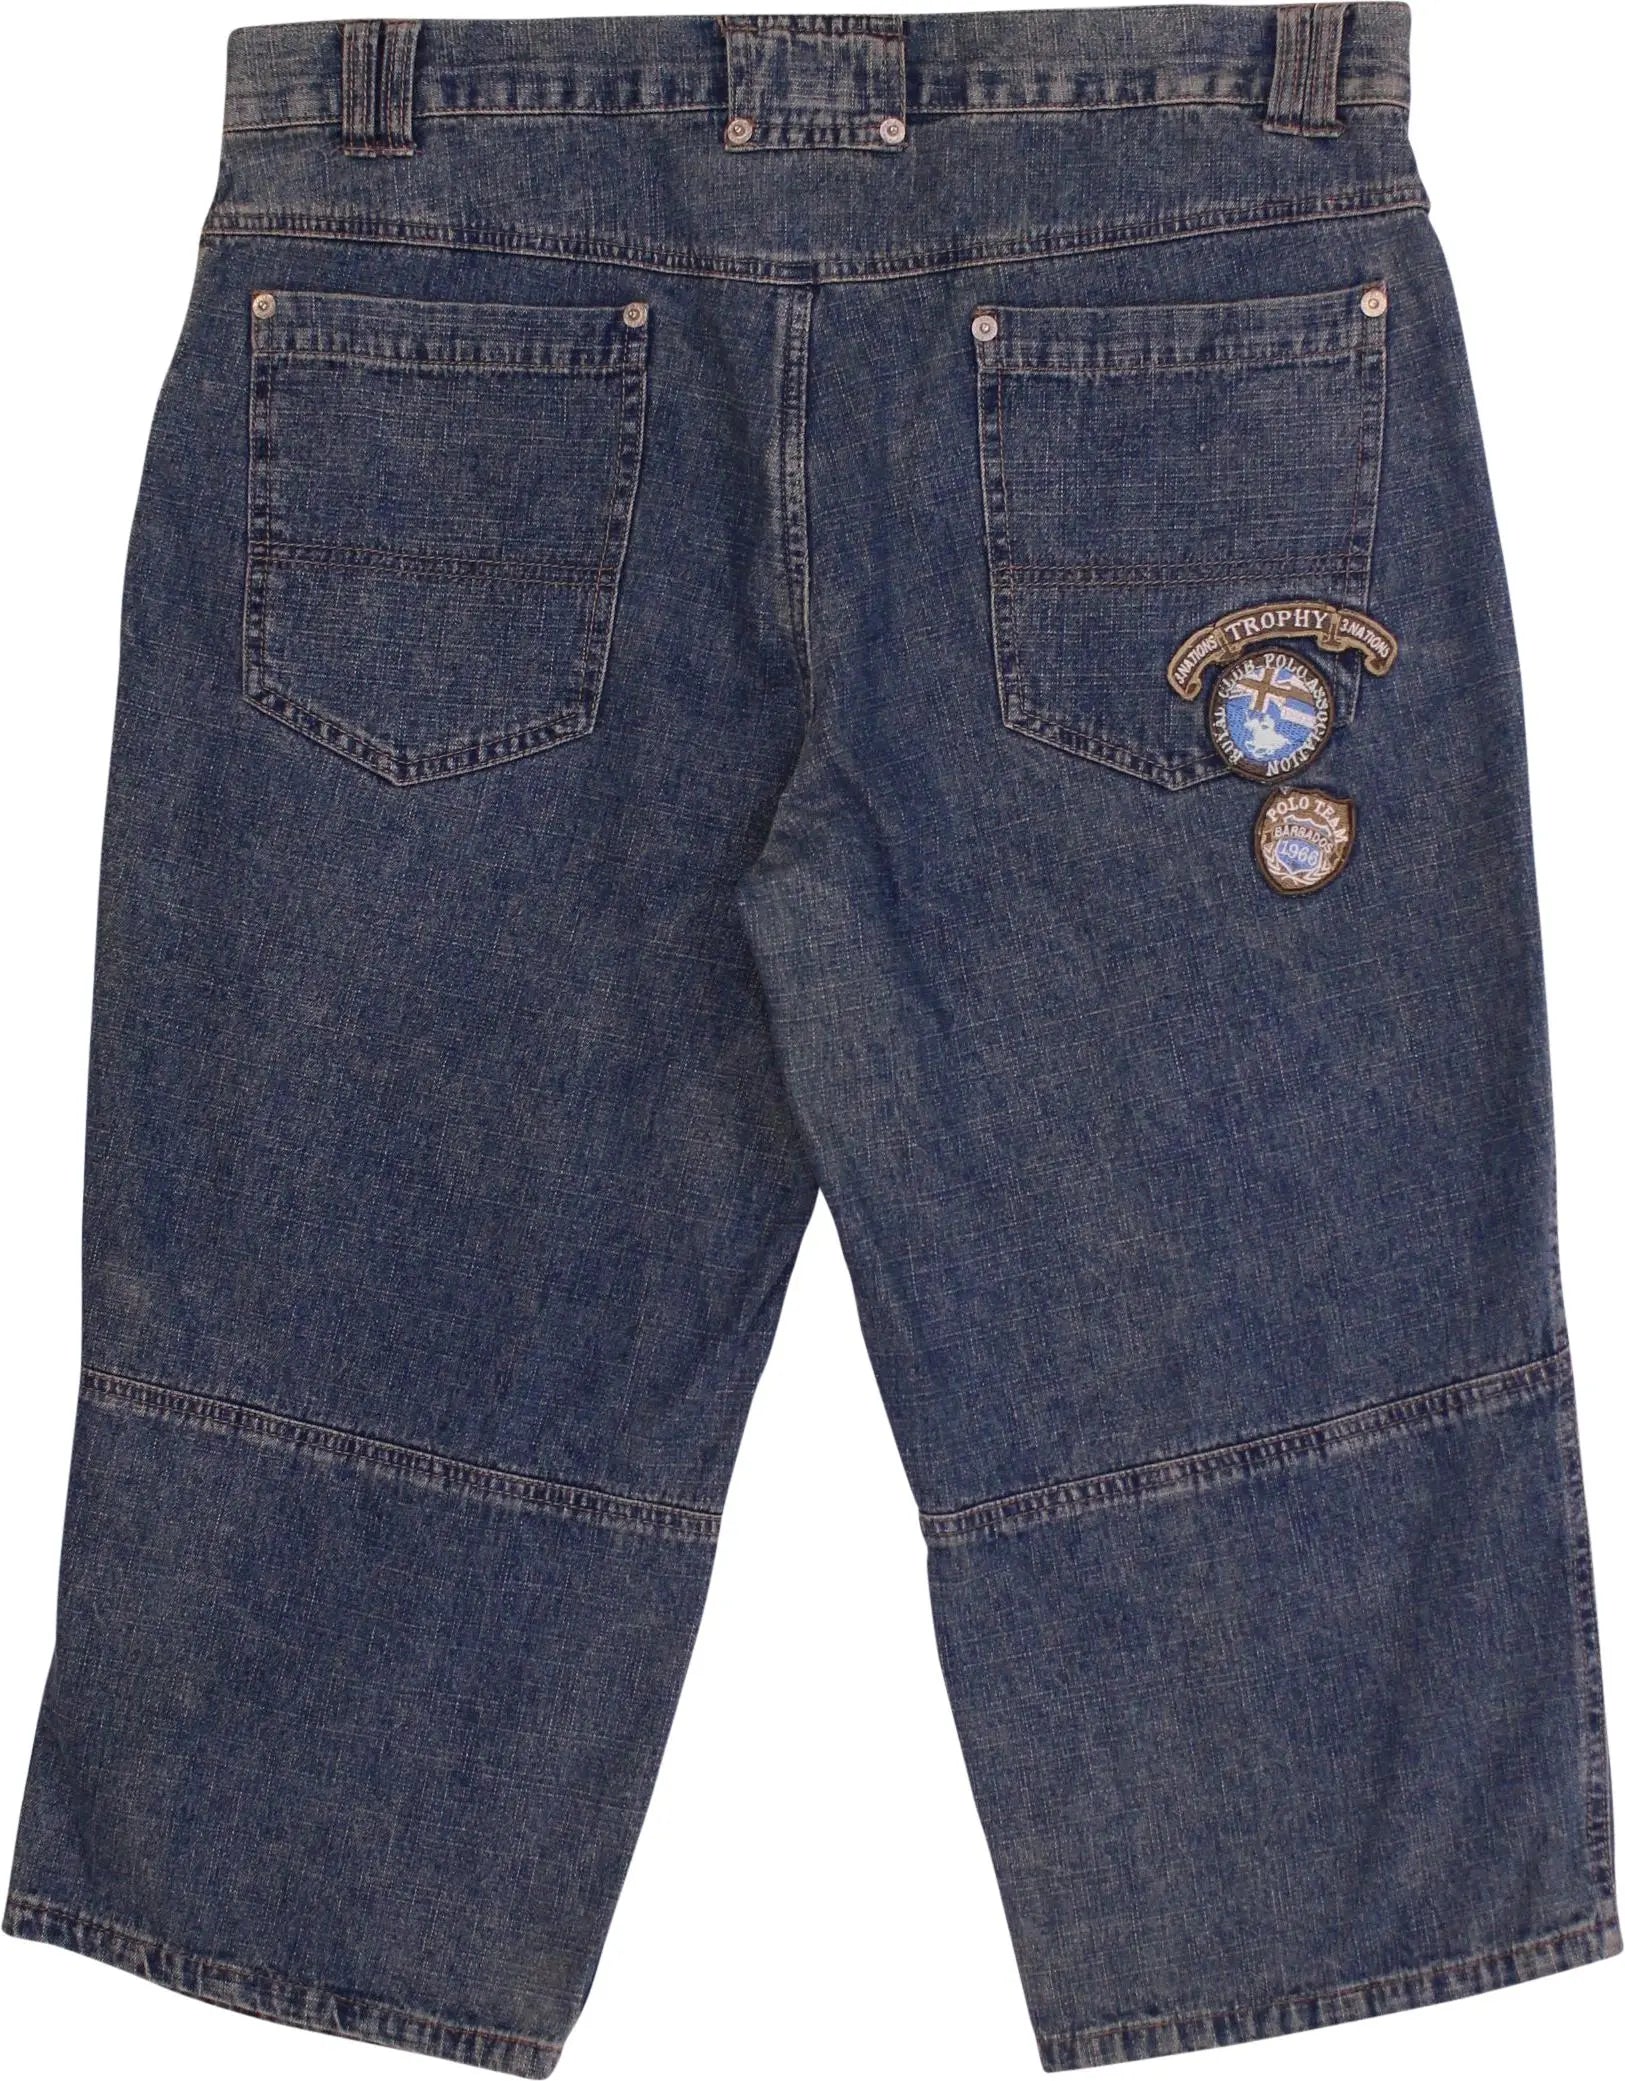 Hans - Denim Pedal Pushers- ThriftTale.com - Vintage and second handclothing